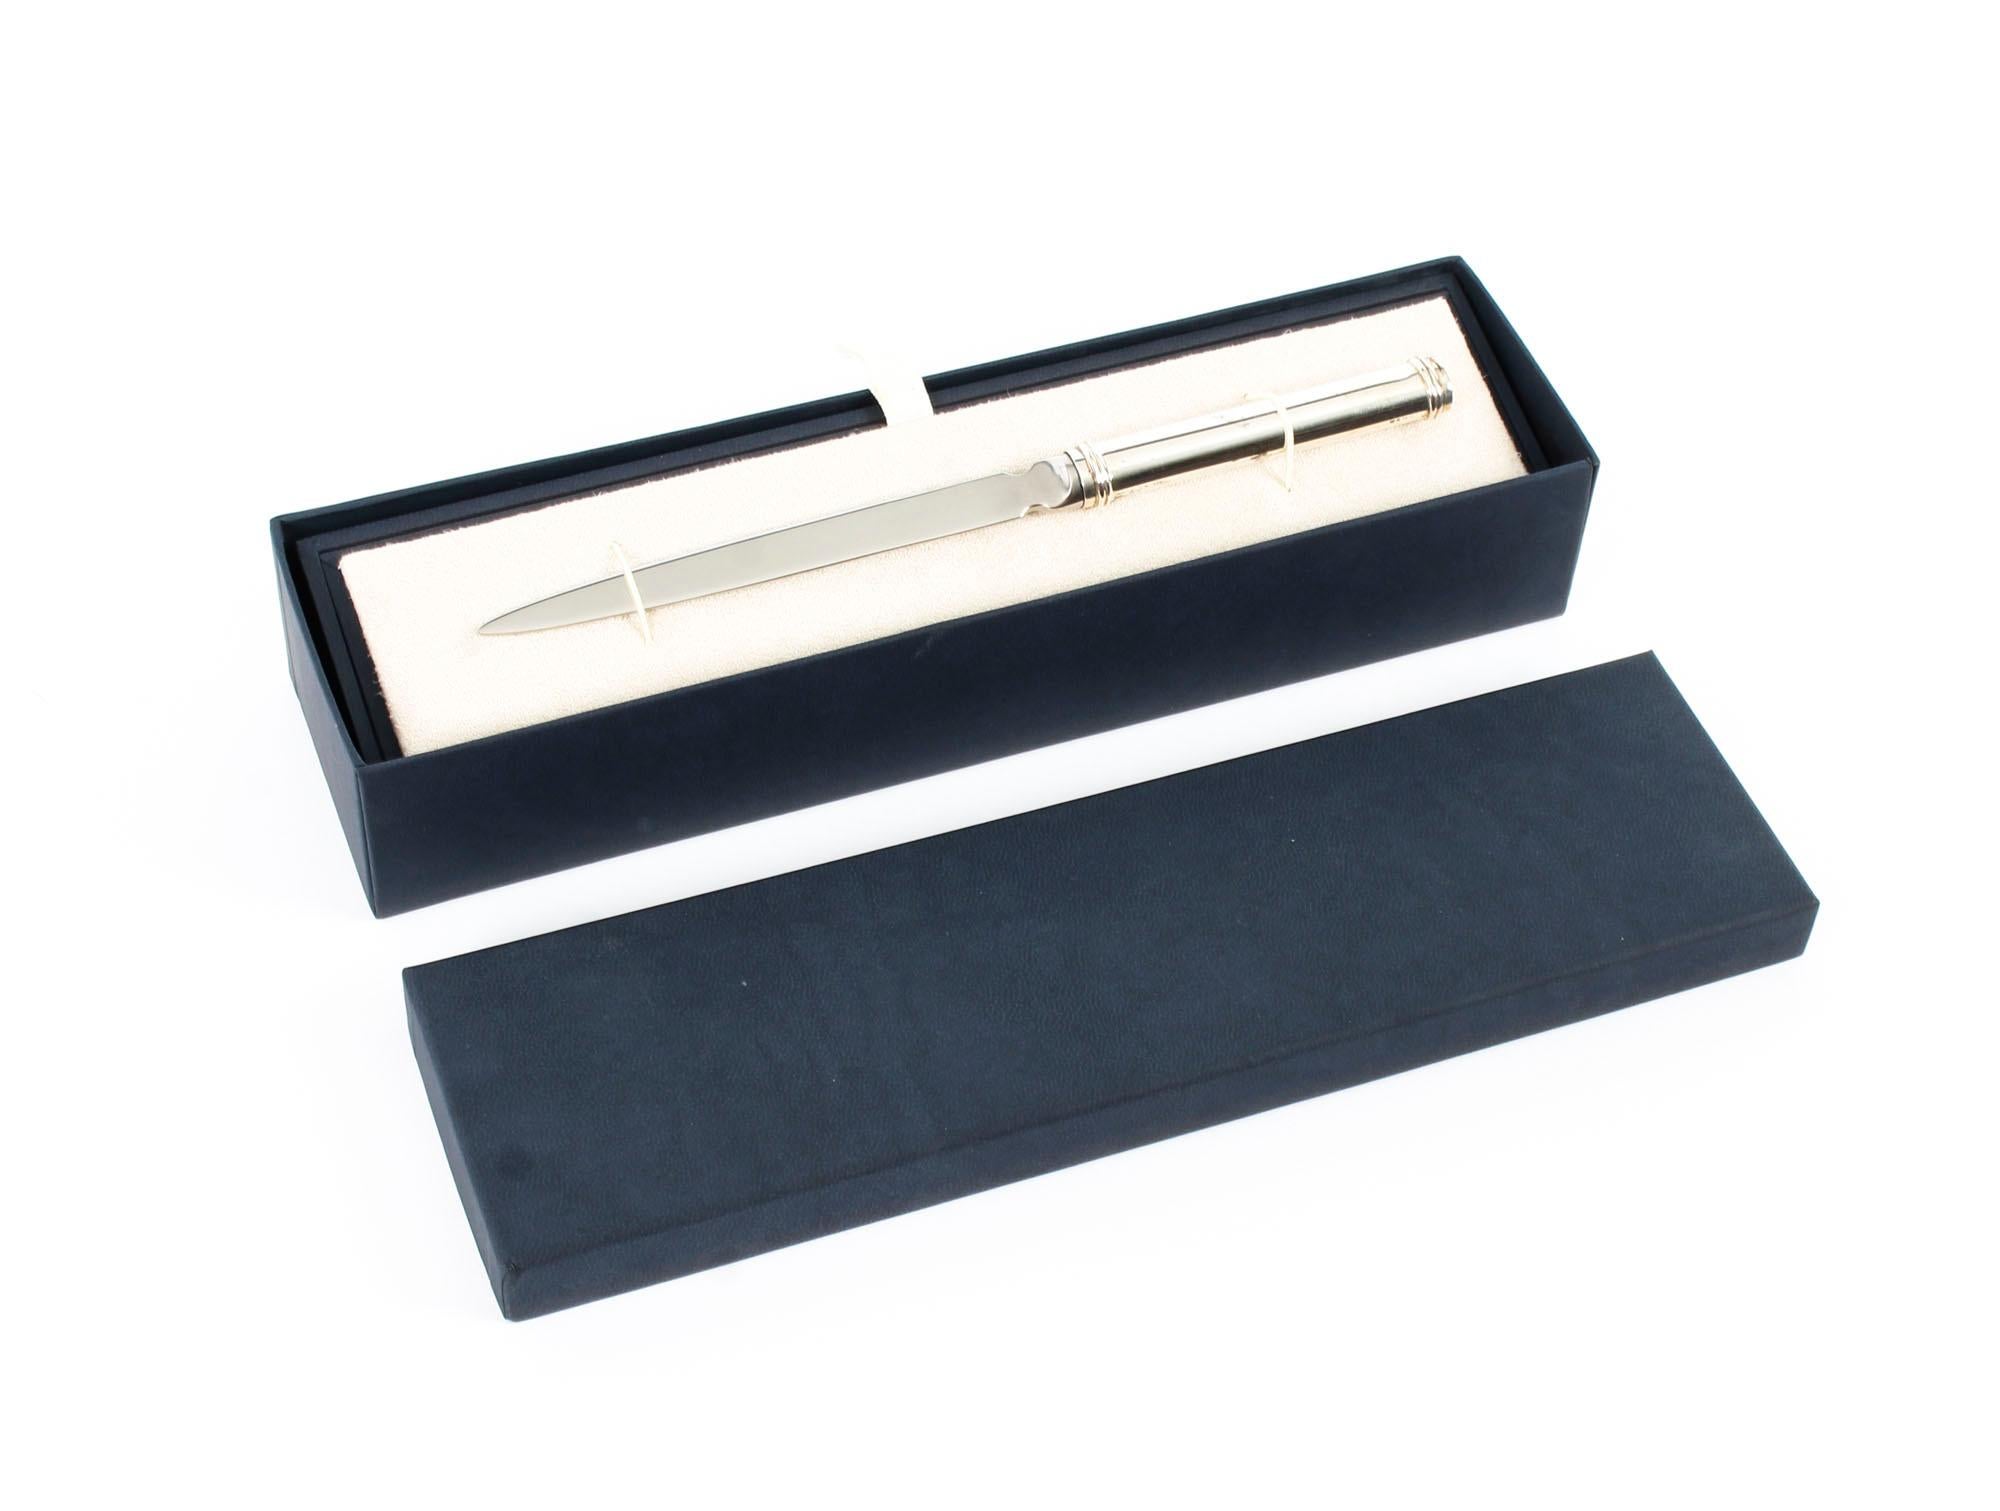 This is an elegant vintage sterling silver paper knife perfect for opening your letters in style, dating from the late 20th century.

Simple, modern, and practical would be a beautiful addition to your desk accessories.

Condition:
In excellent